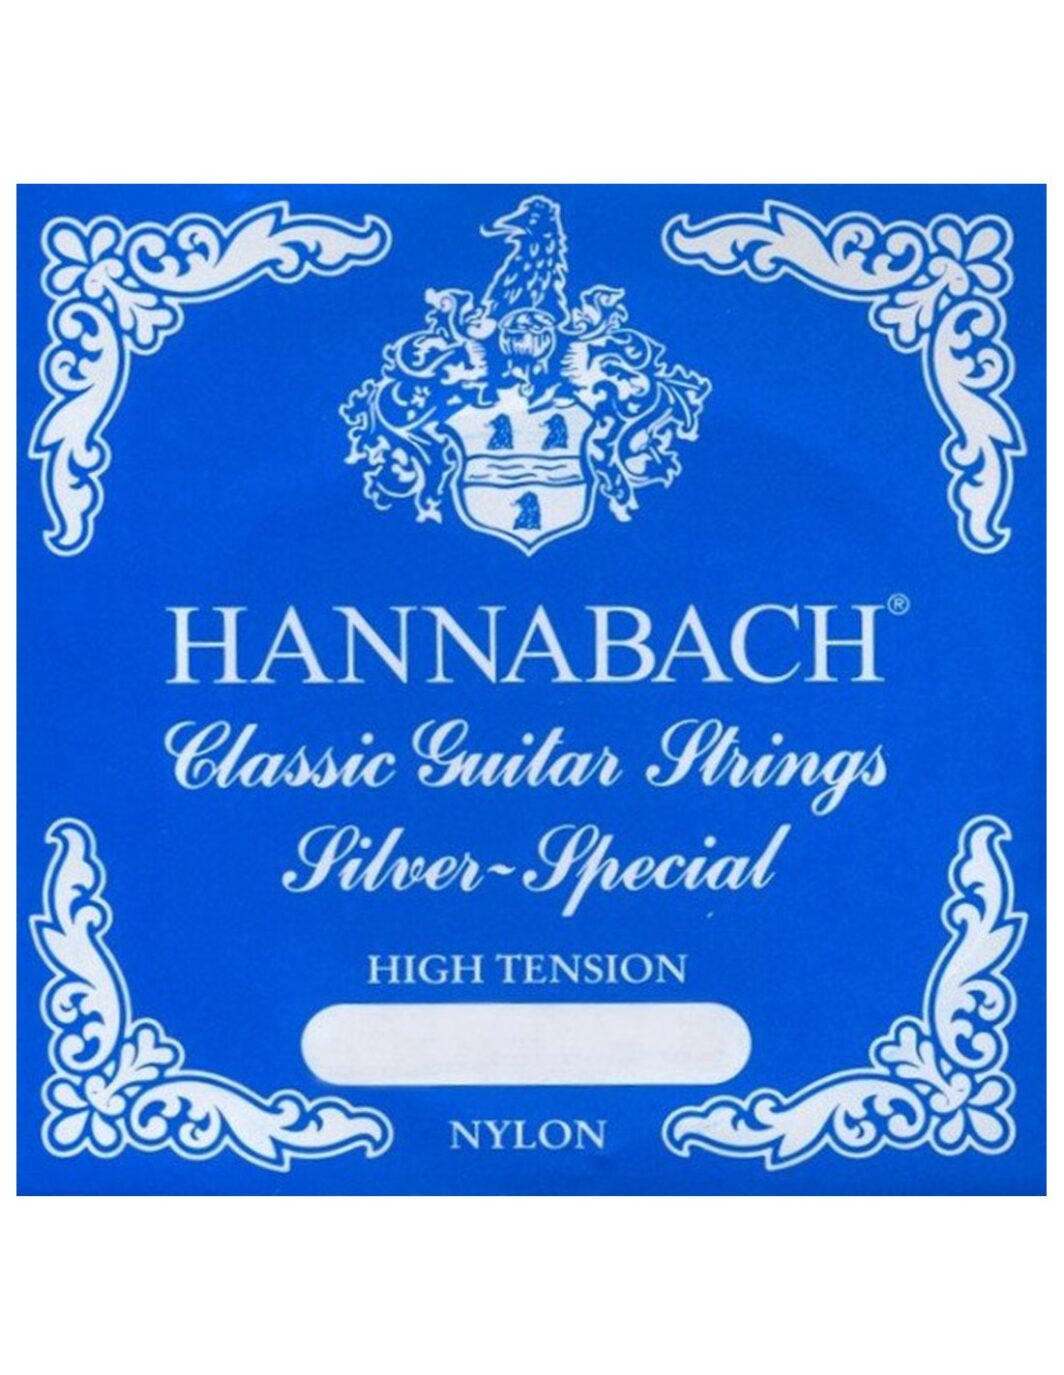 Hannabach 815 HT Silver Special High Tension